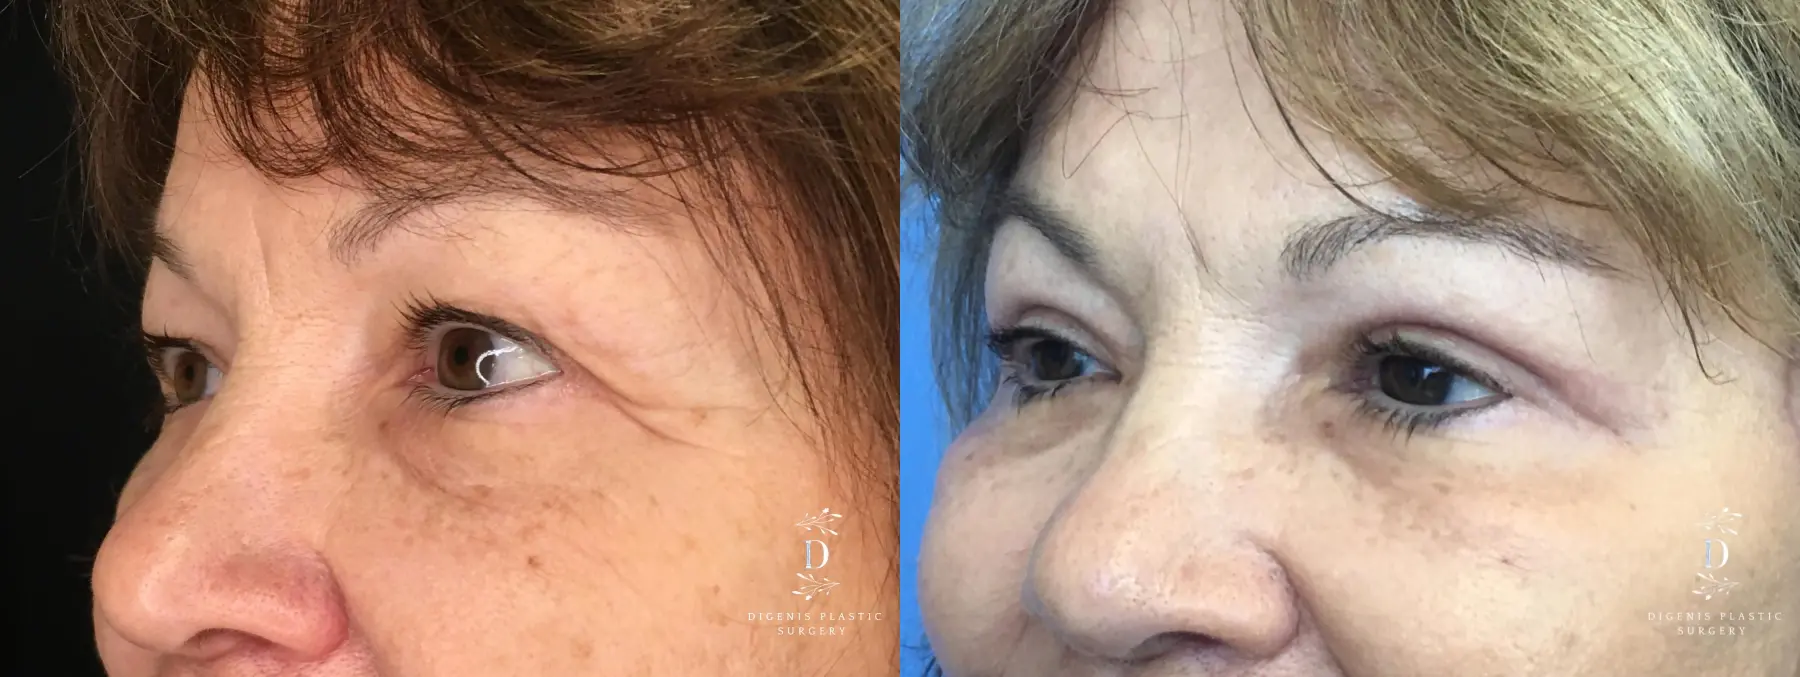 Eyelid Surgery: Patient 20 - Before and After 4